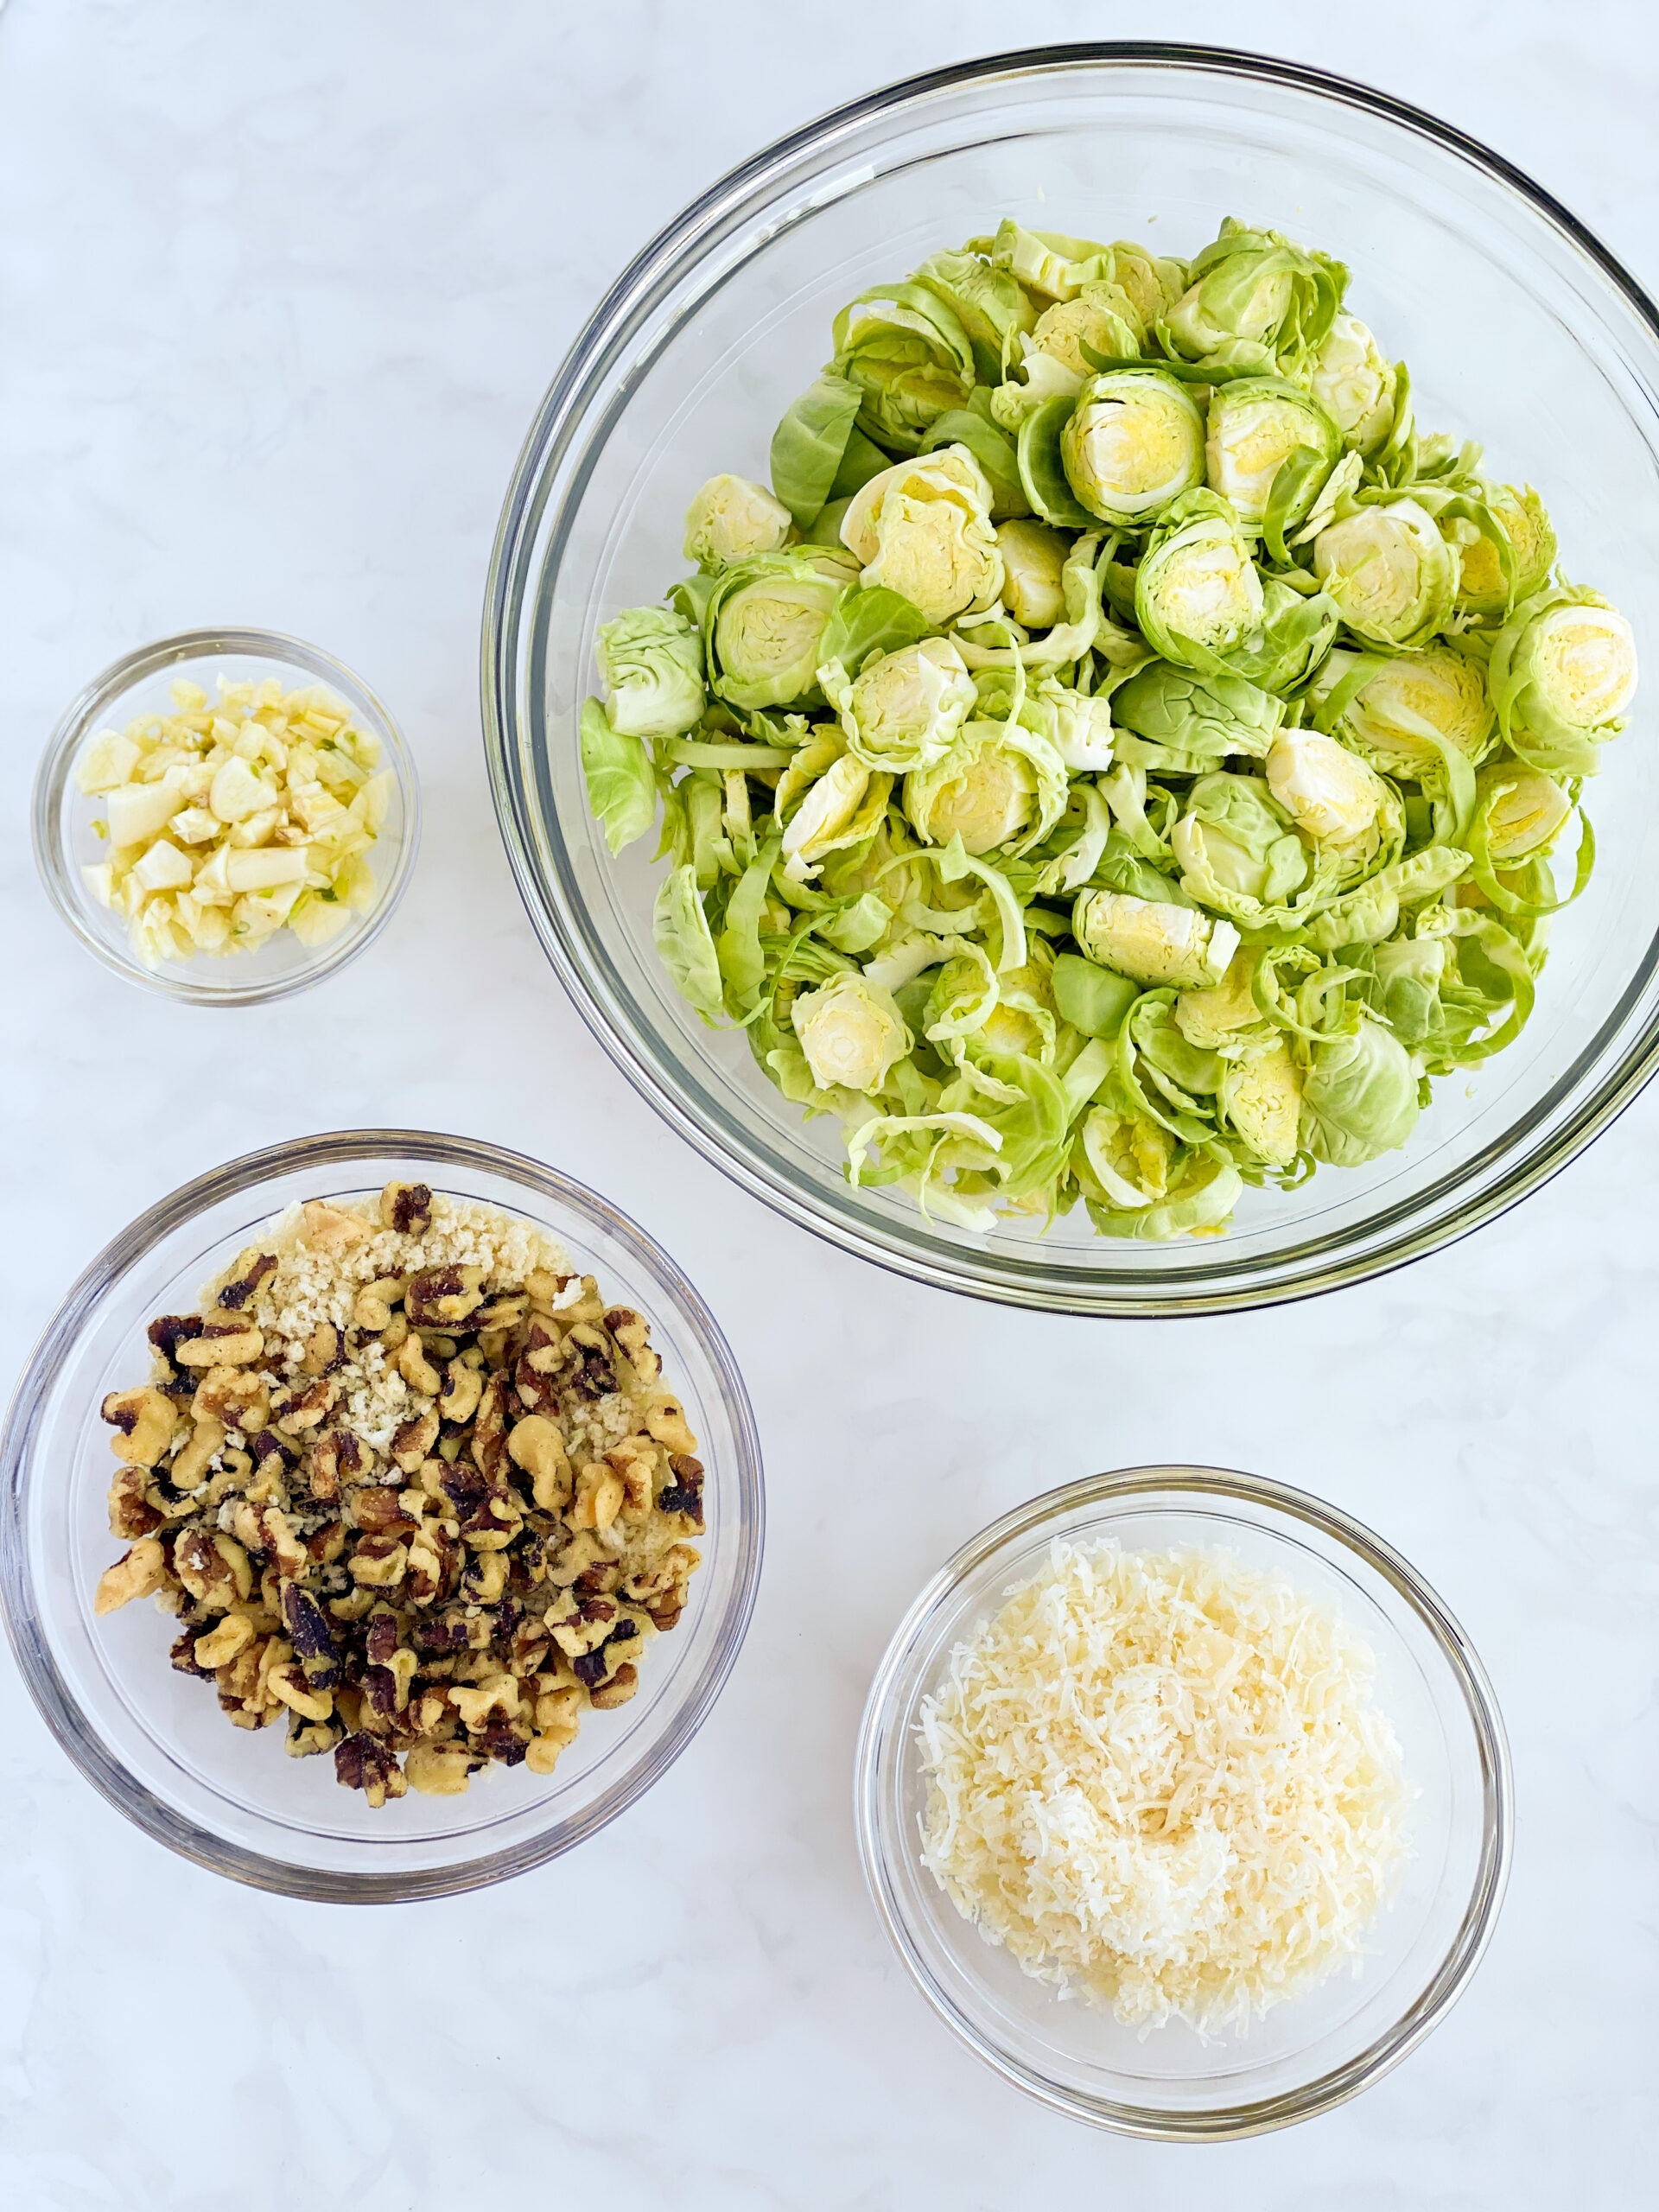 brussel sprouts, parmesan cheese, breadcrumbs and walnuts, chopped garlic